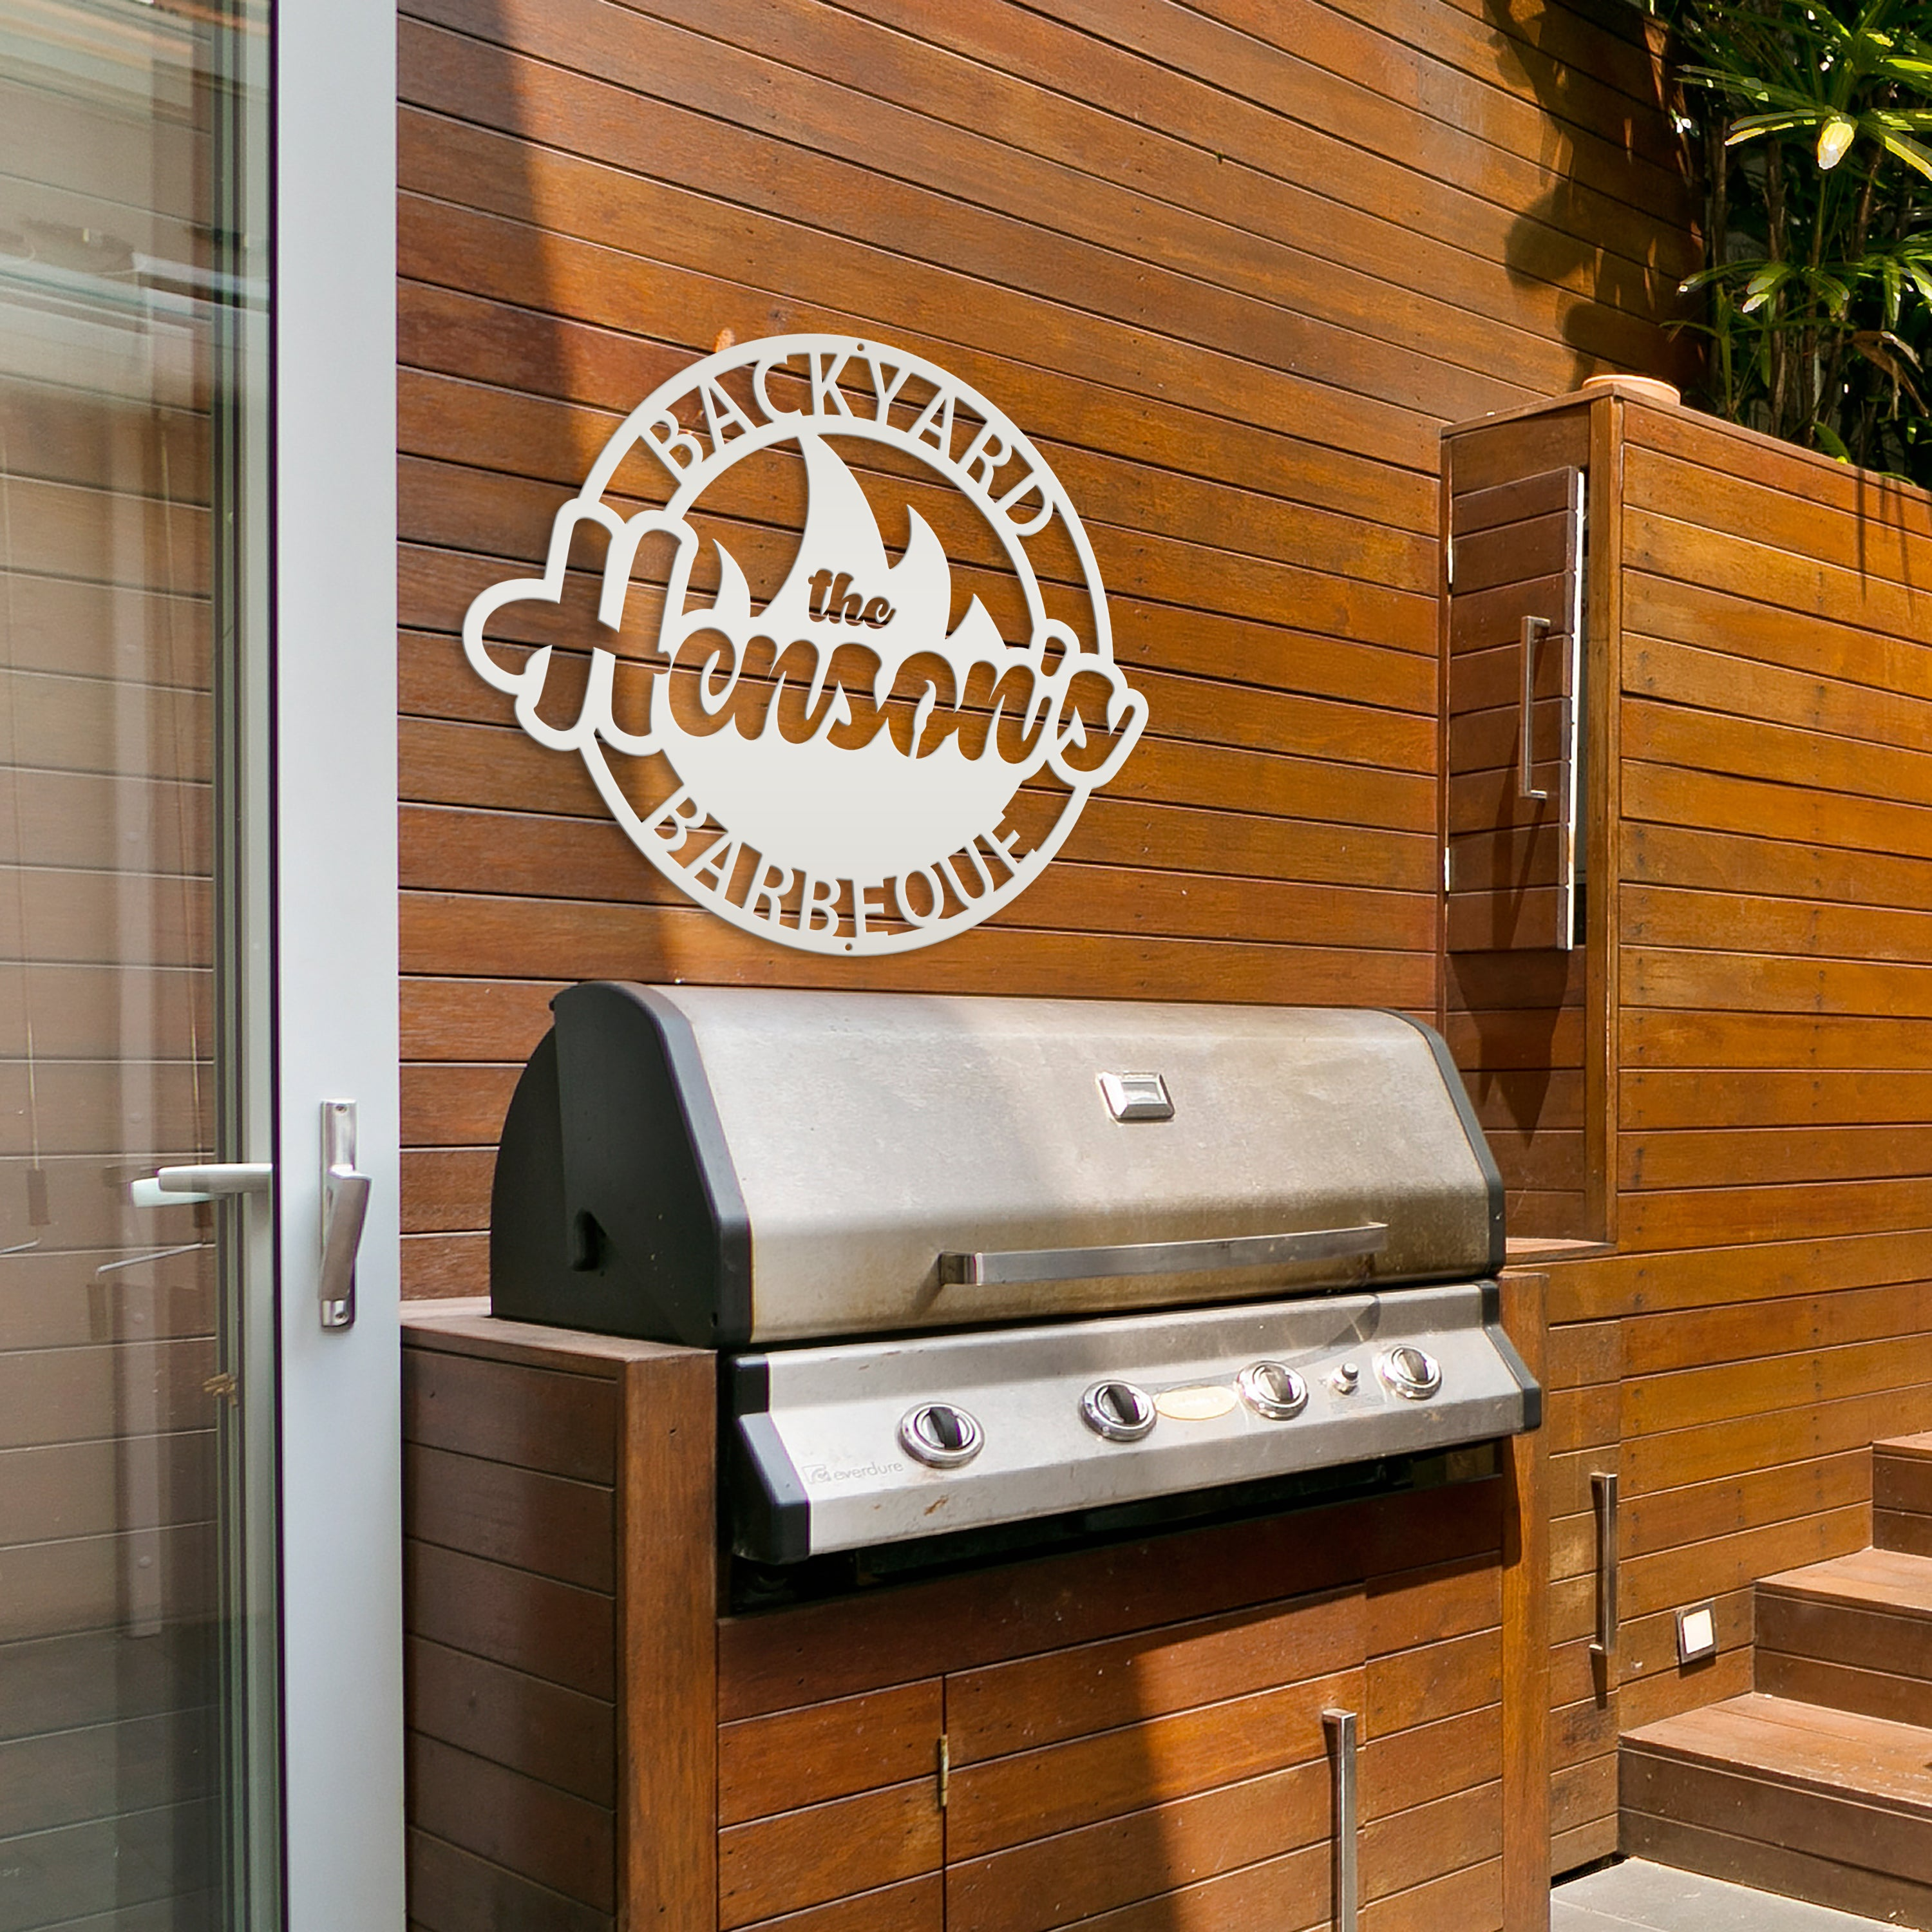 backyard-barbeque-round-with-fla